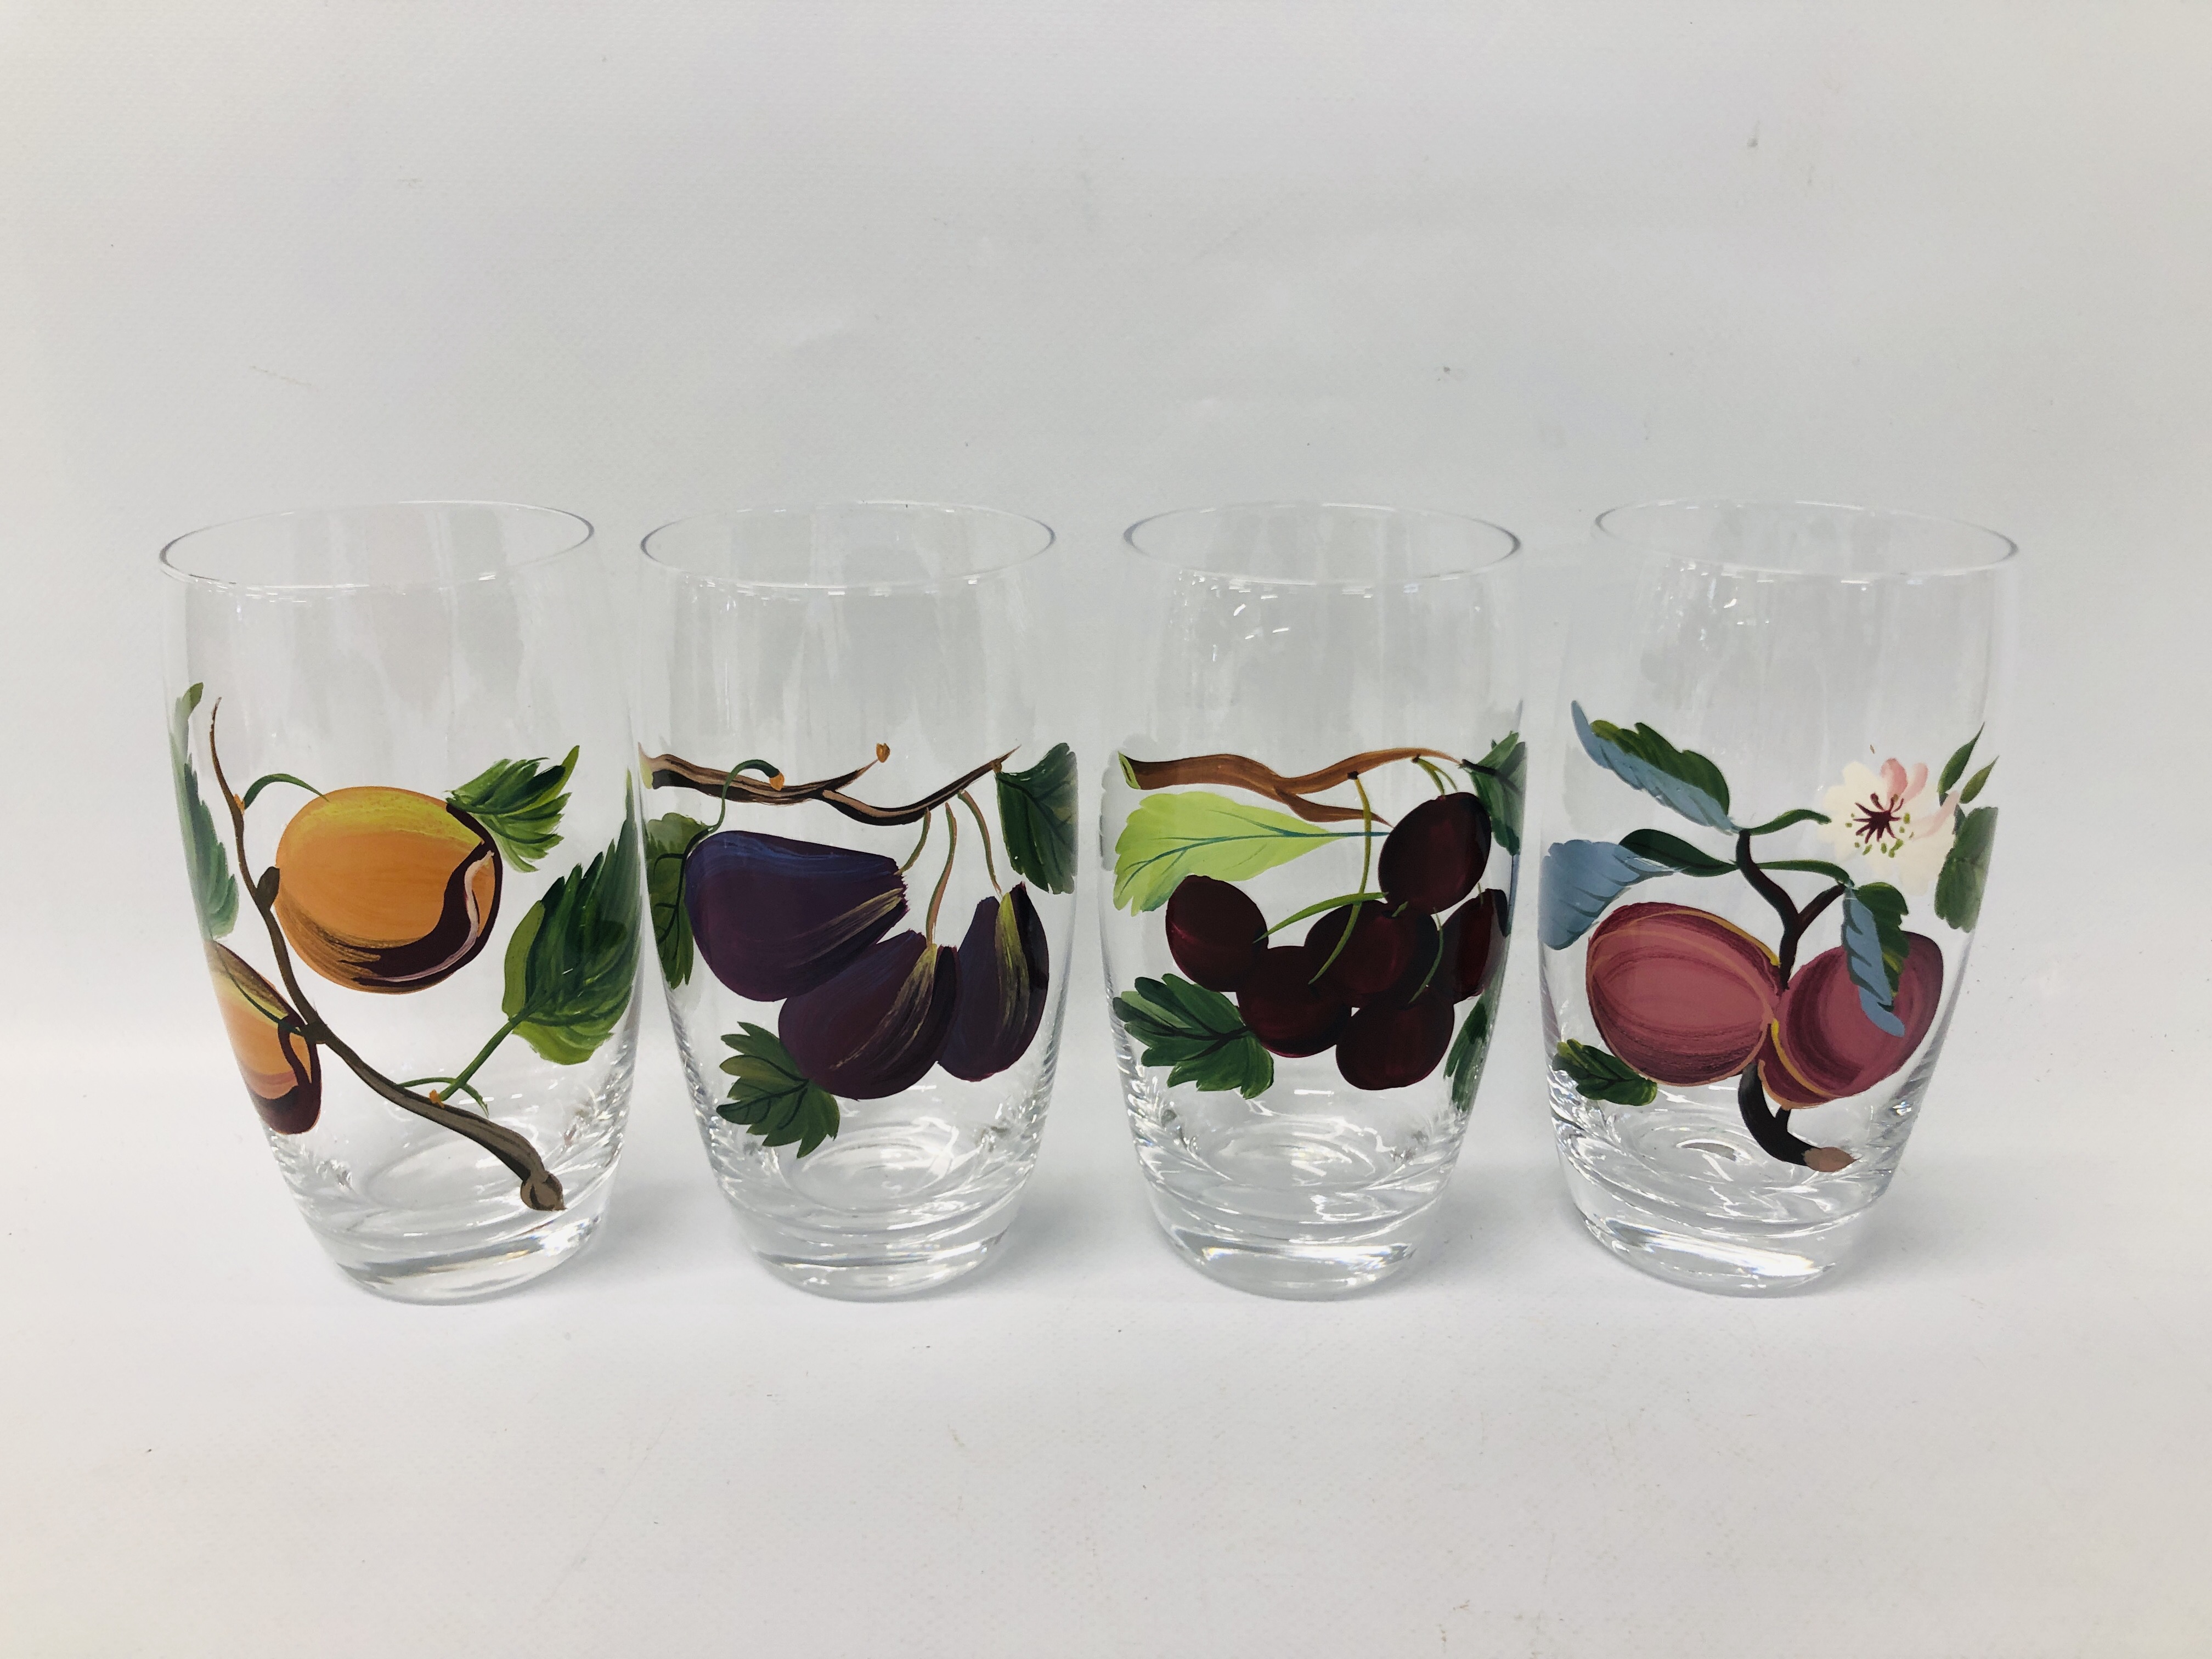 COLLECTION OF GOOD QUALITY CUT GLASS CRYSTAL DRINKING VESSELS ALONG WITH A SET OF 4 HAND PAINTED - Image 4 of 11